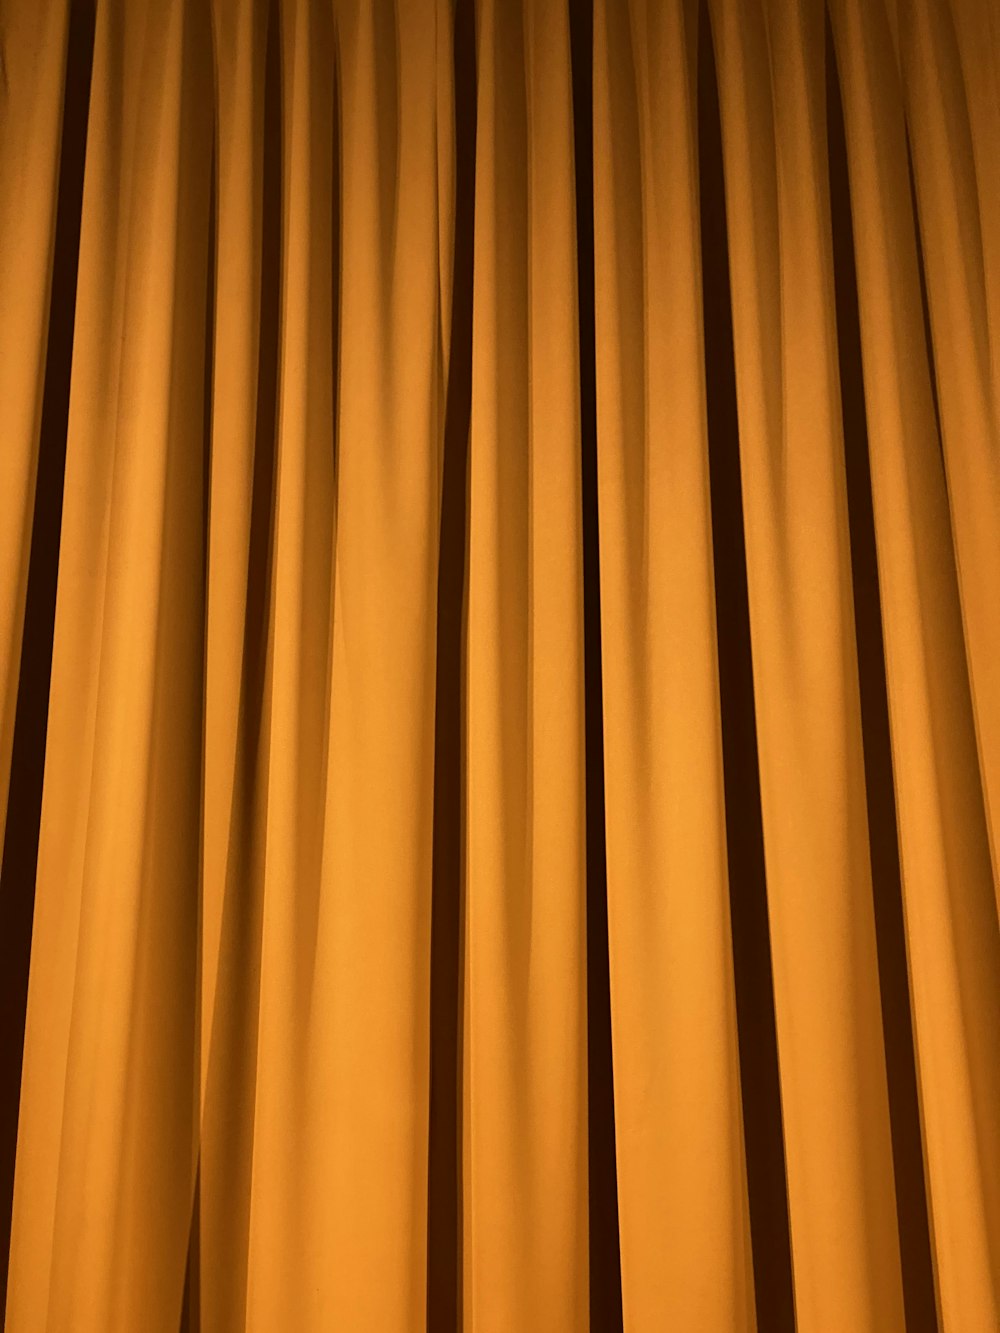 yellow curtain in close up photography